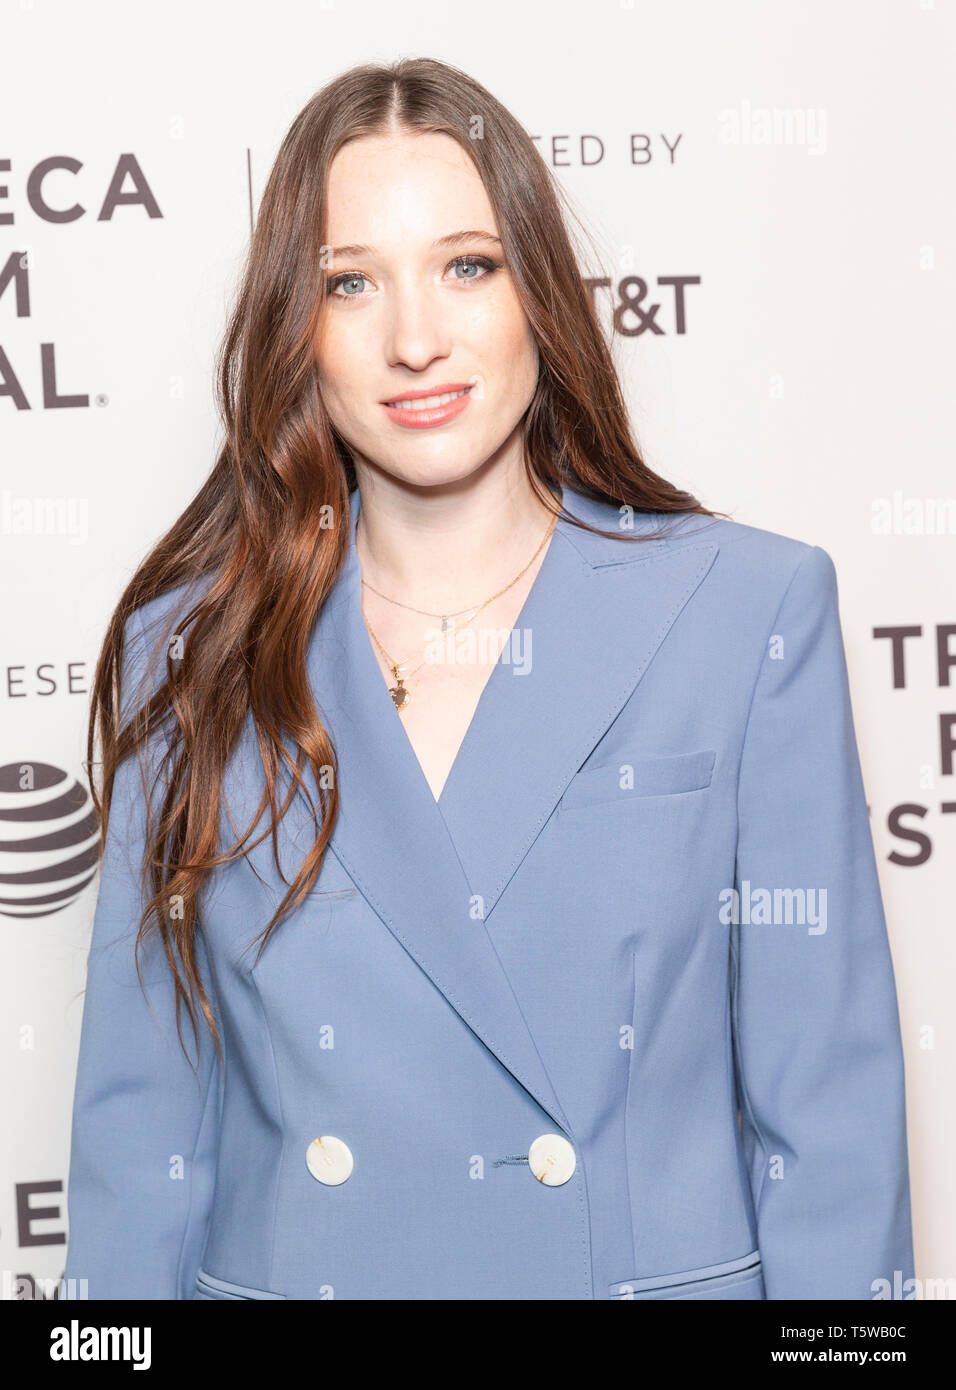 New York, NY - April 26, 2019: Sophie Lowe wearing dress by Camilla Mack attends the Blow The Man Down screening at Tribeca Film Festival at SVA Theatre Stock Photo